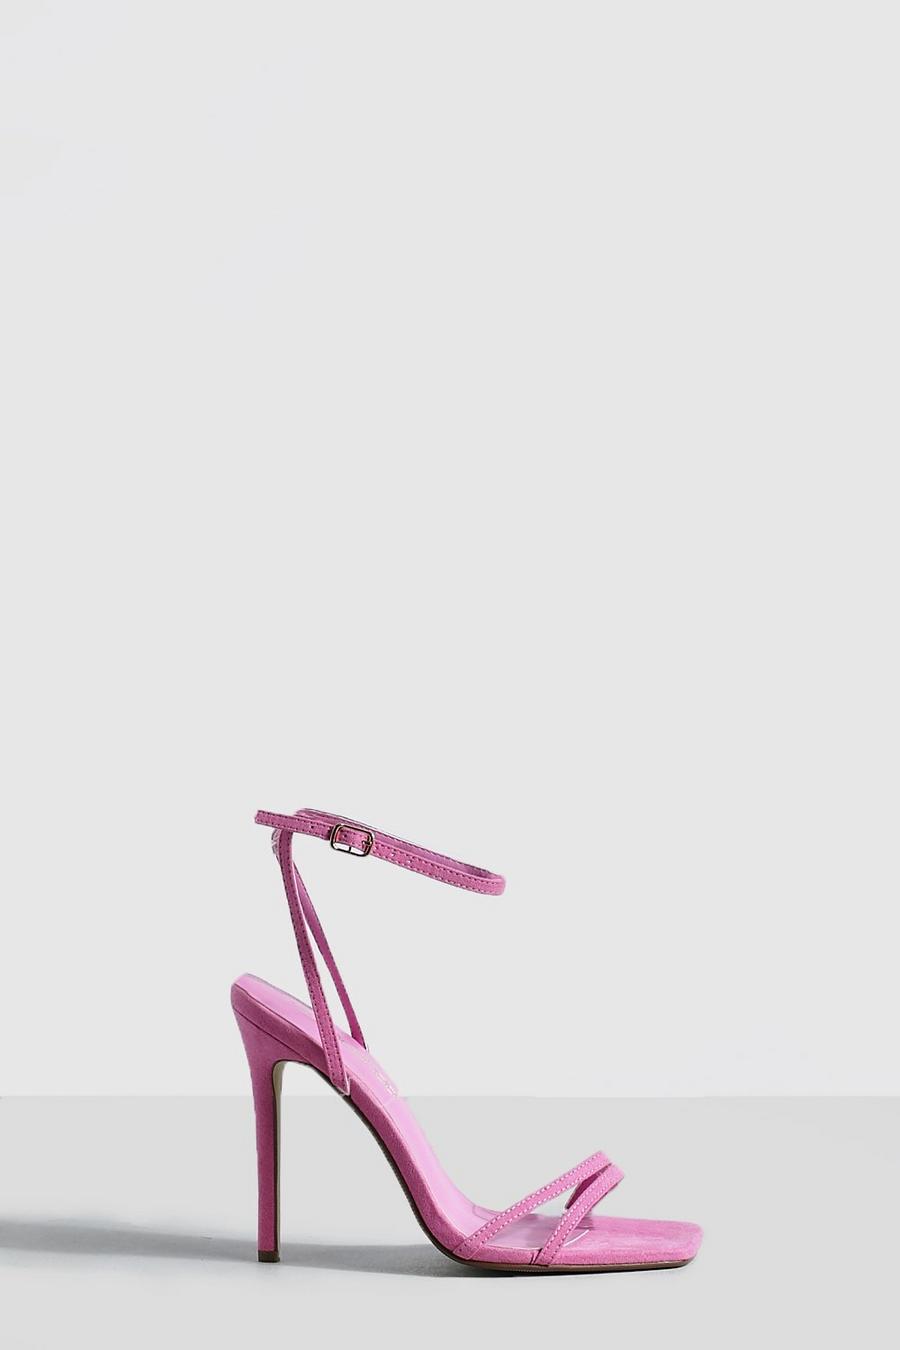 Neon-pink Double Strap Barely There Stiletto Heels